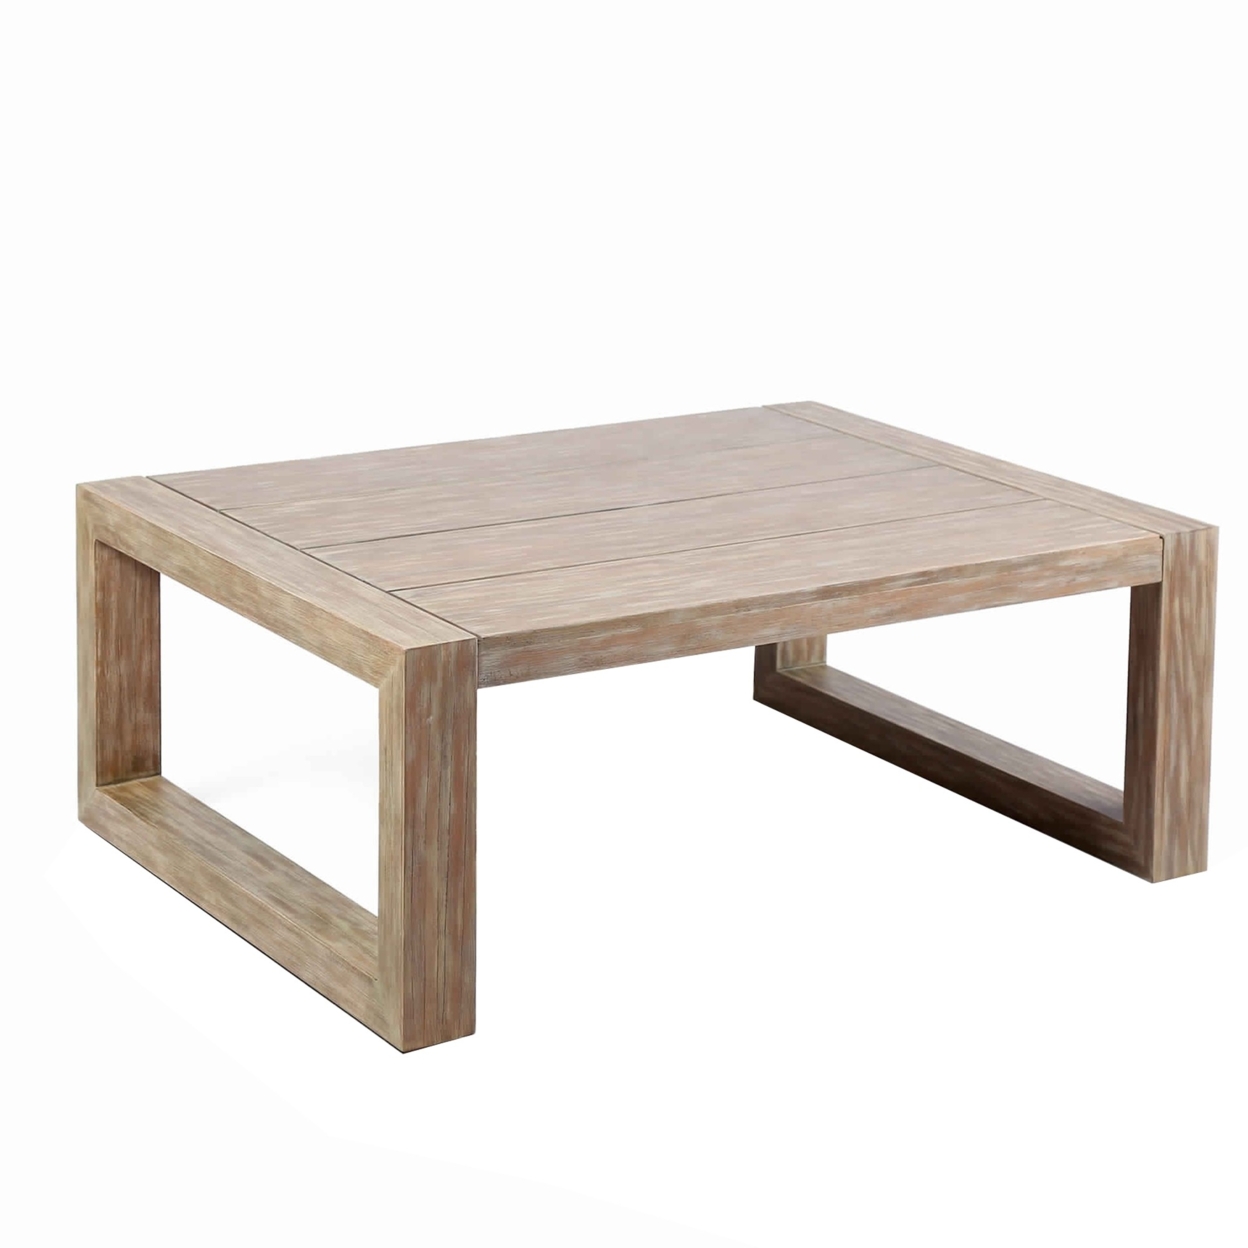 Wooden Outdoor Coffee Table With Plank Design Top, Gray- Saltoro Sherpi